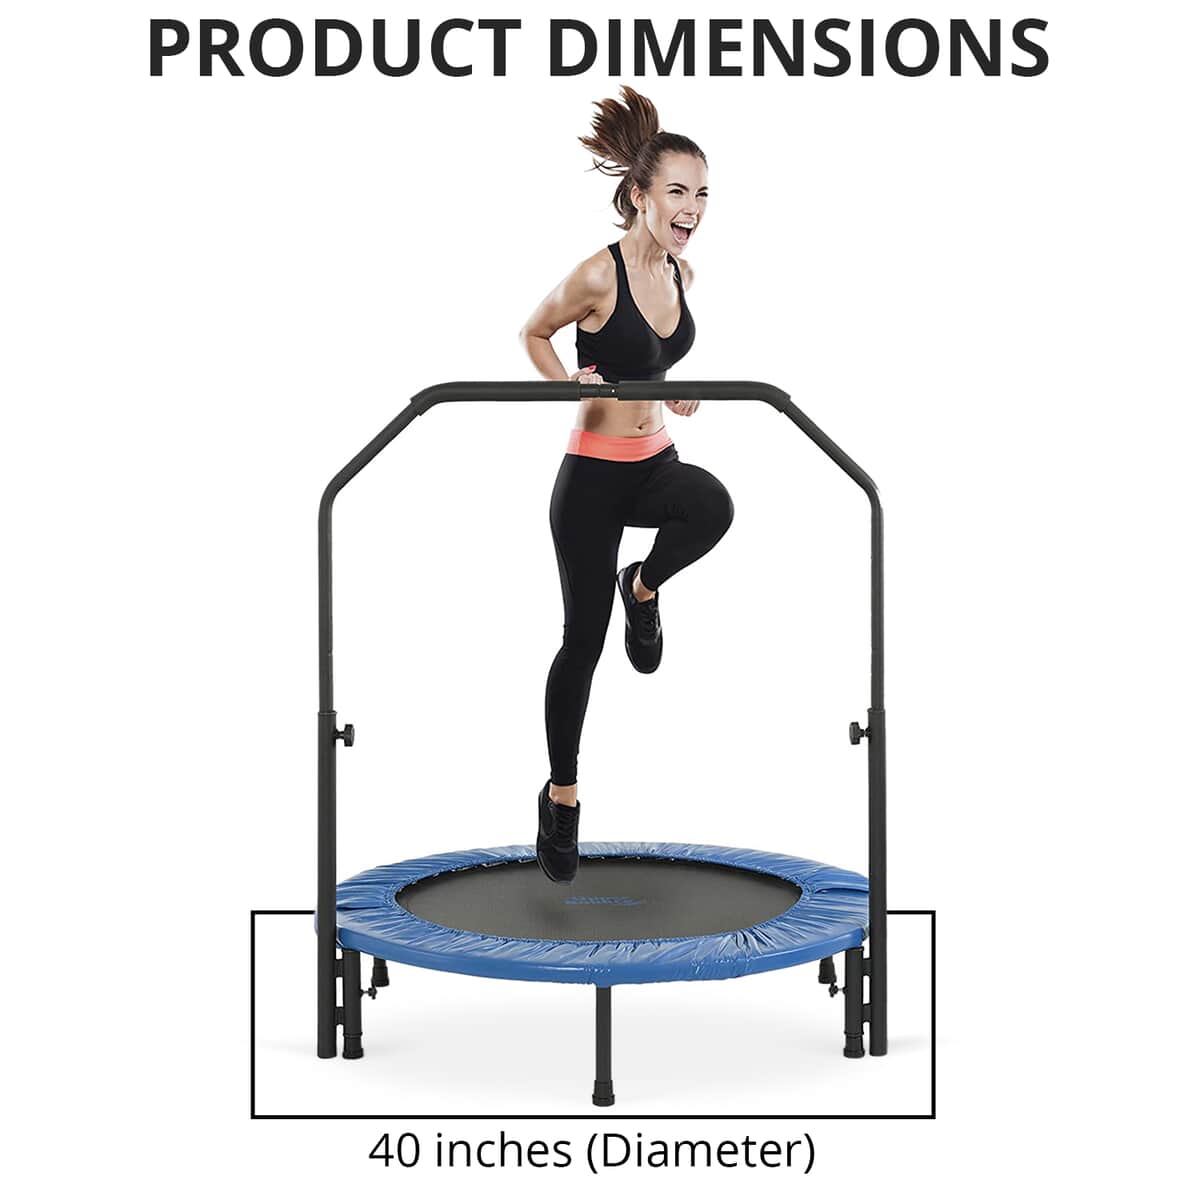 Buy Upper Bounce 40 Inches Mini Foldable Rebounder Fitness Trampoline with Adjustable Handrail ShopLC.